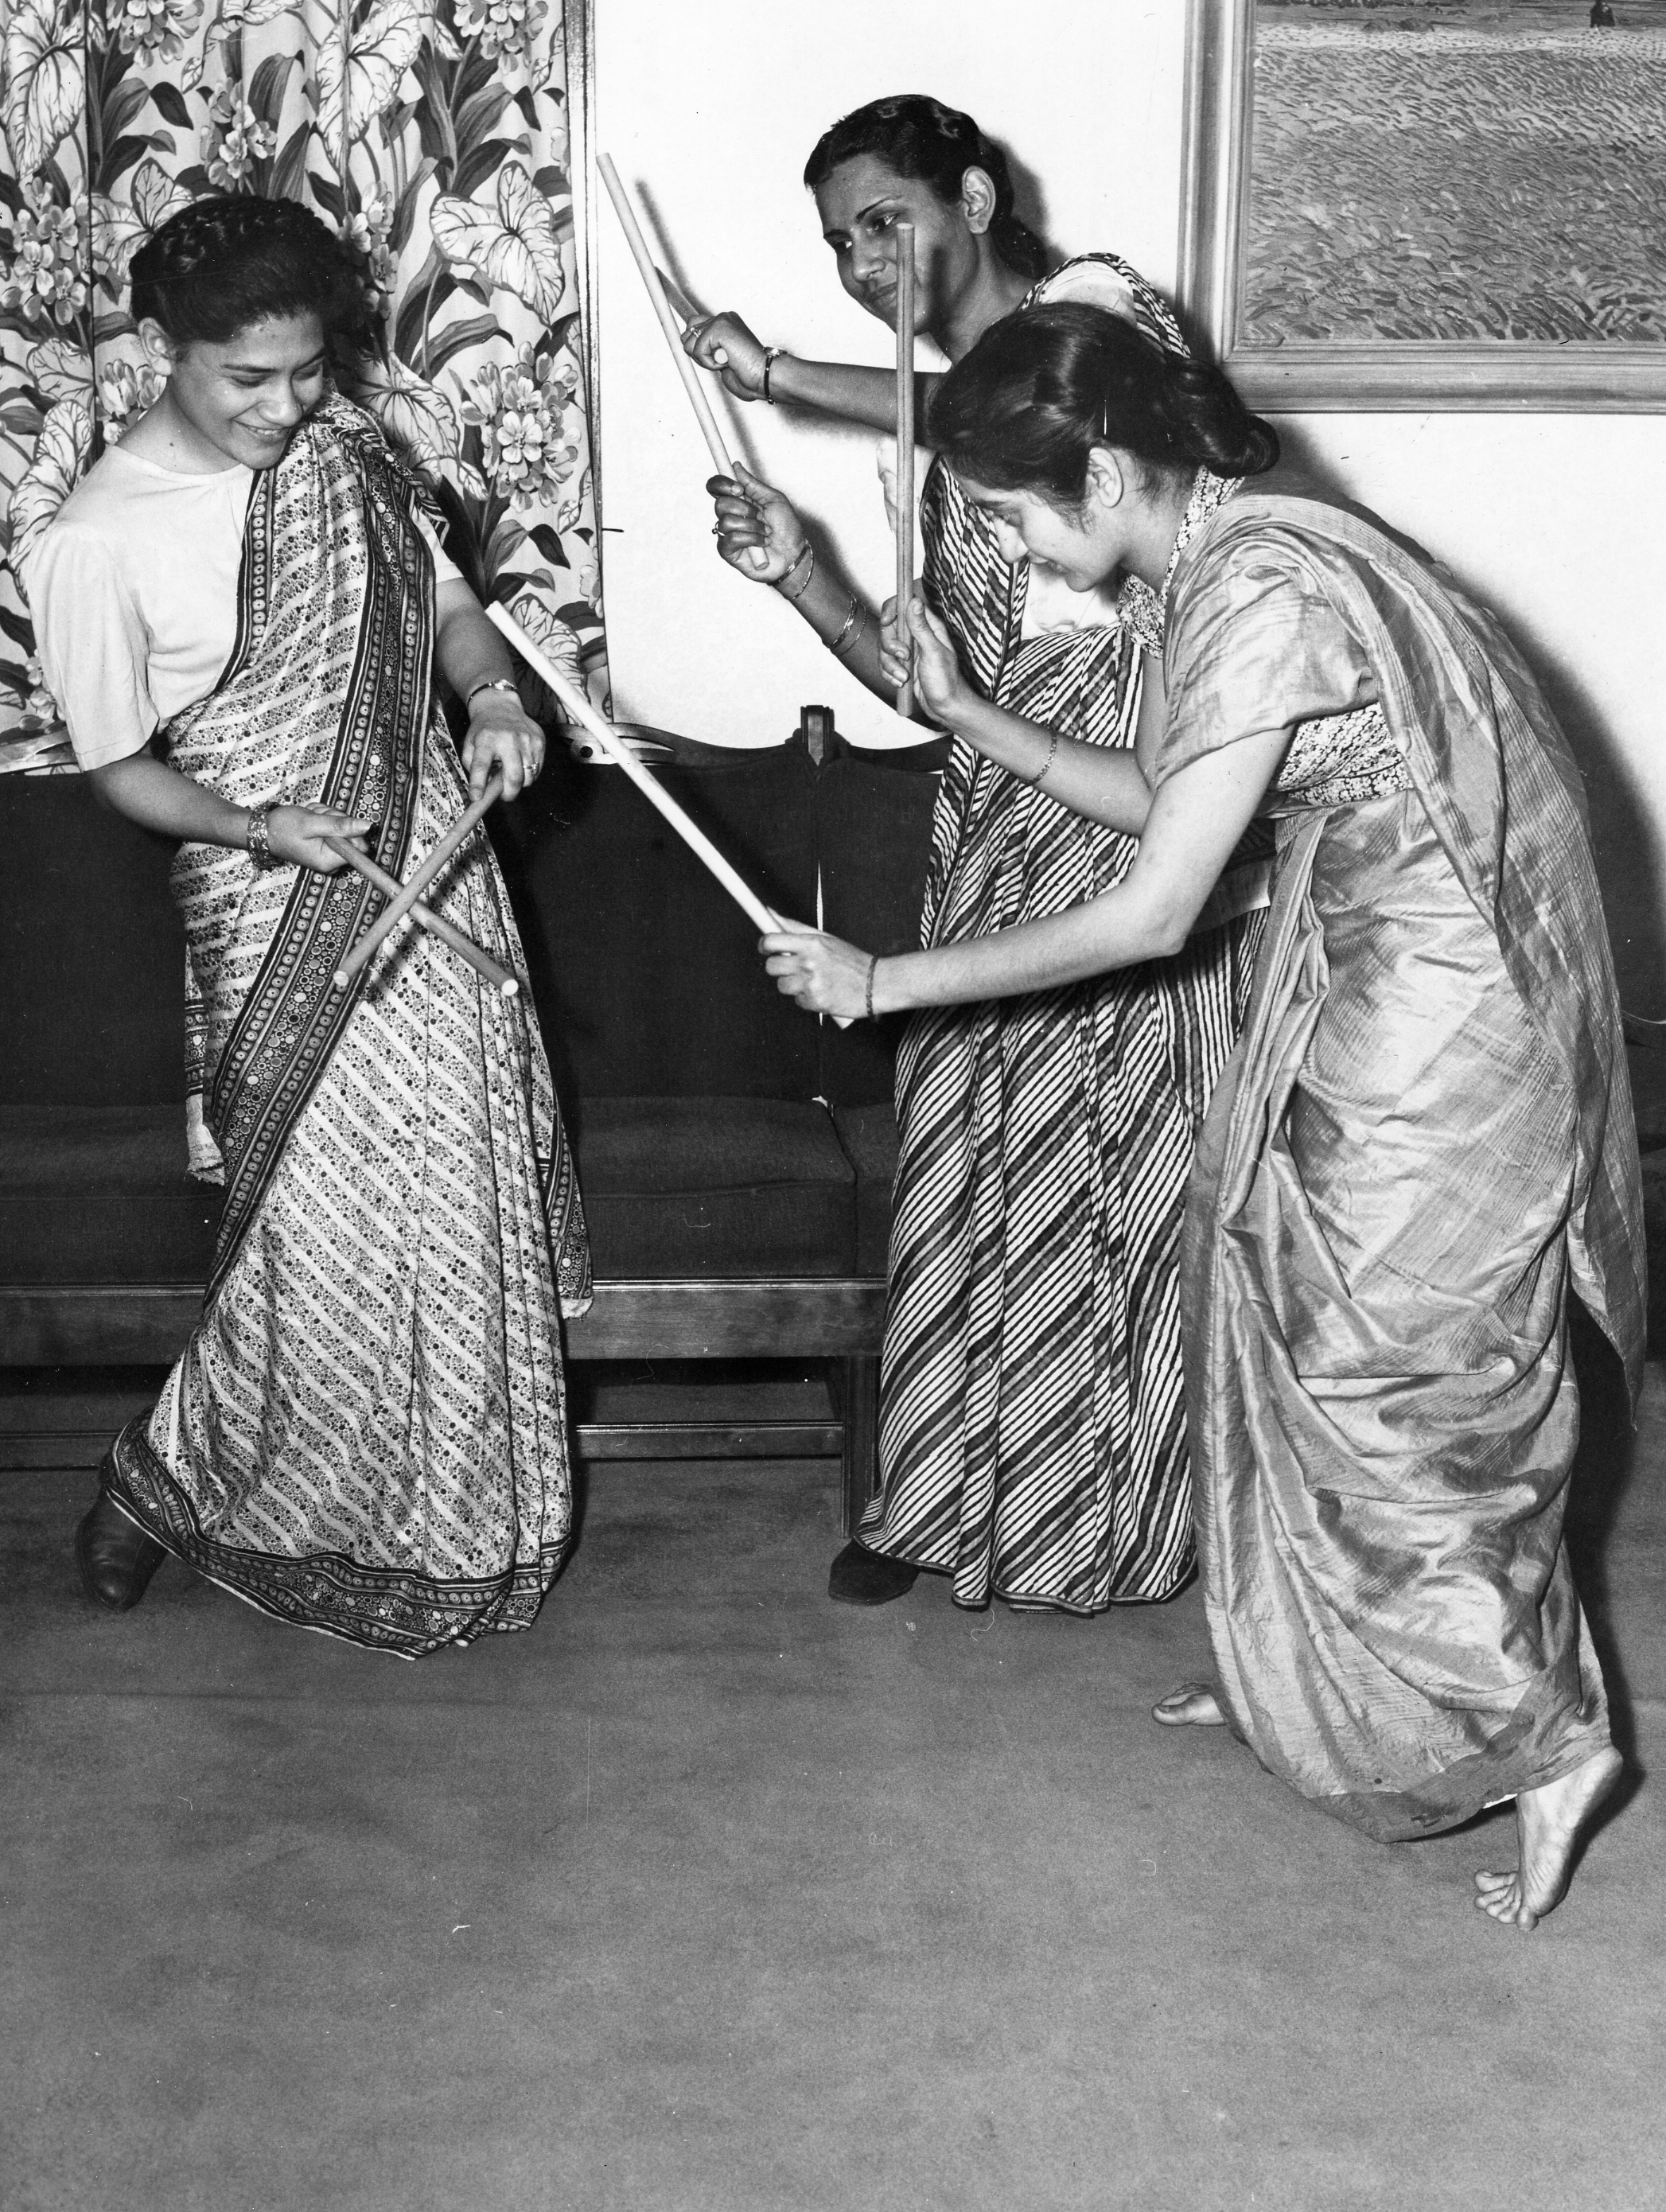 Indian stick dance at the International Festival, 1953